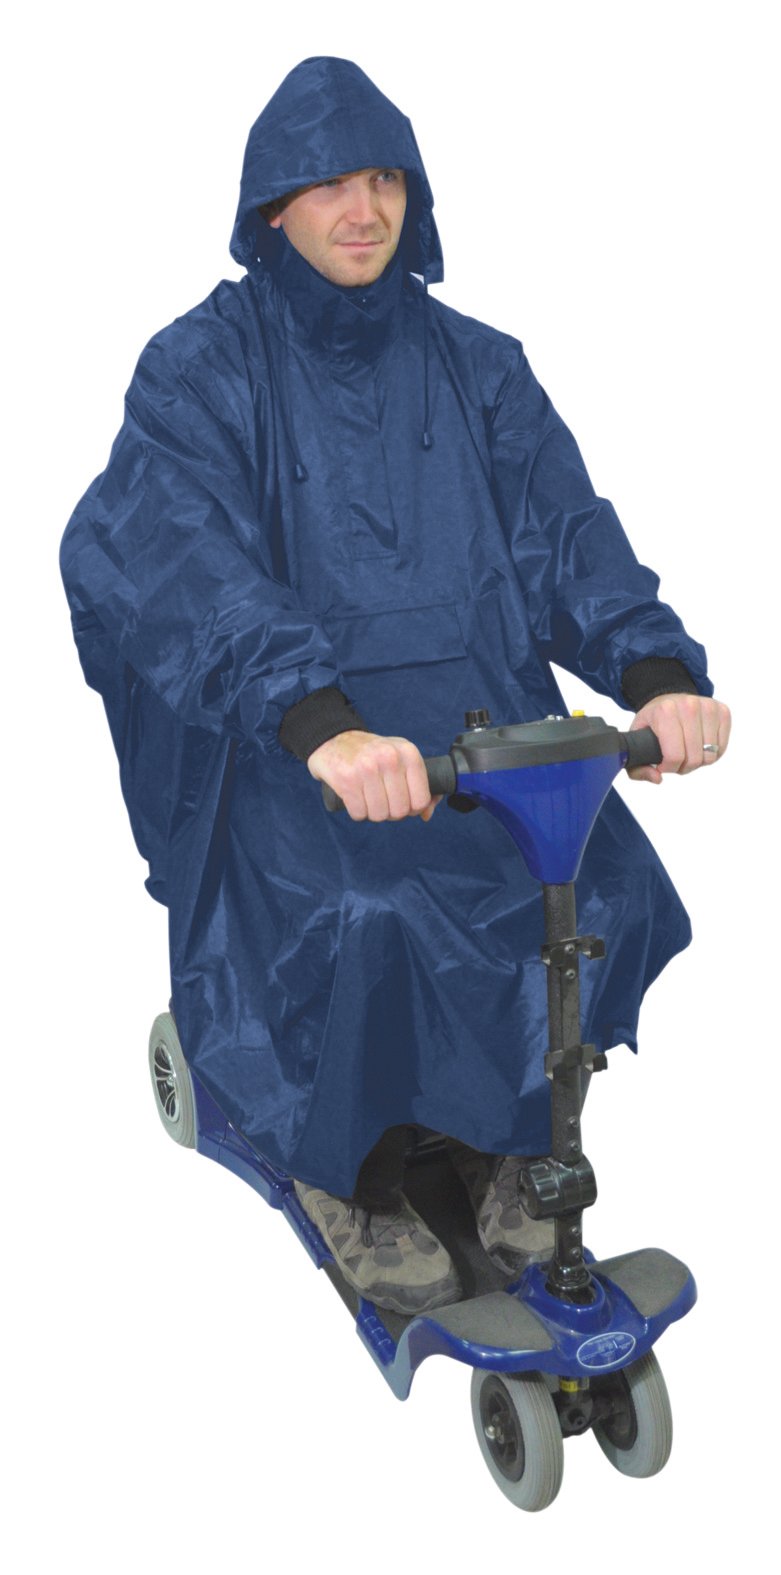 Deluxe Scooter Poncho Navy